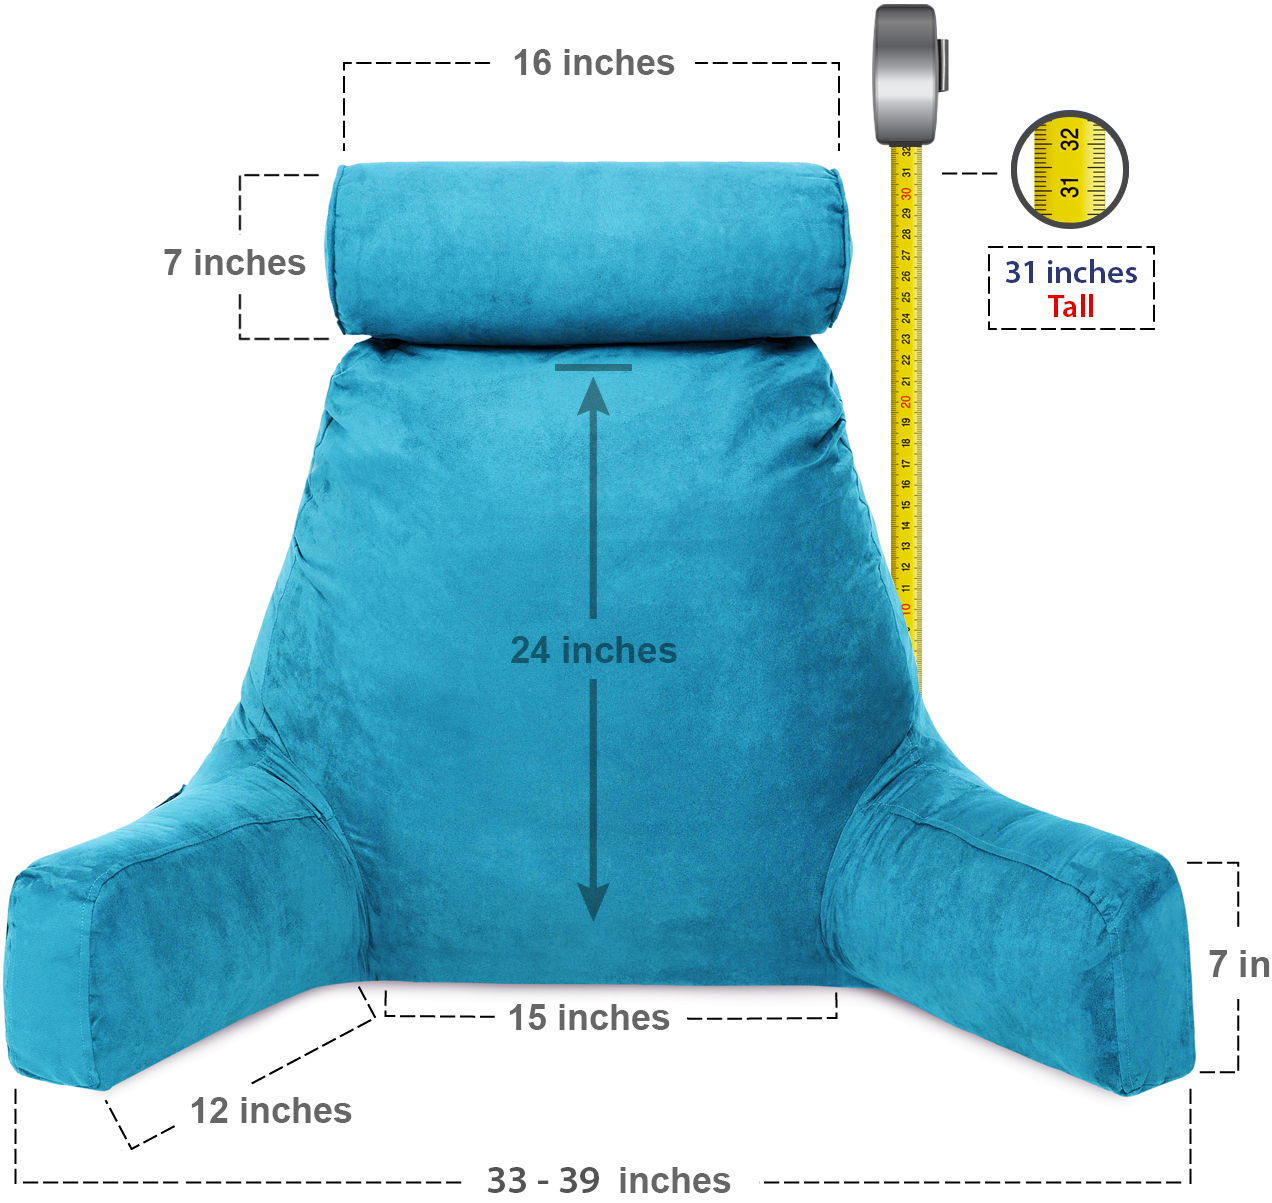 Husband Pillow, Aspen Edition - Reading and Bed Rest Pillow with Arms - Neck Roll on Bungee Cord or Removable - Premium Memory Foam - Reversible Two-Sided Cover Microsuede or Microfiber, Rodeo Blue - image 2 of 11